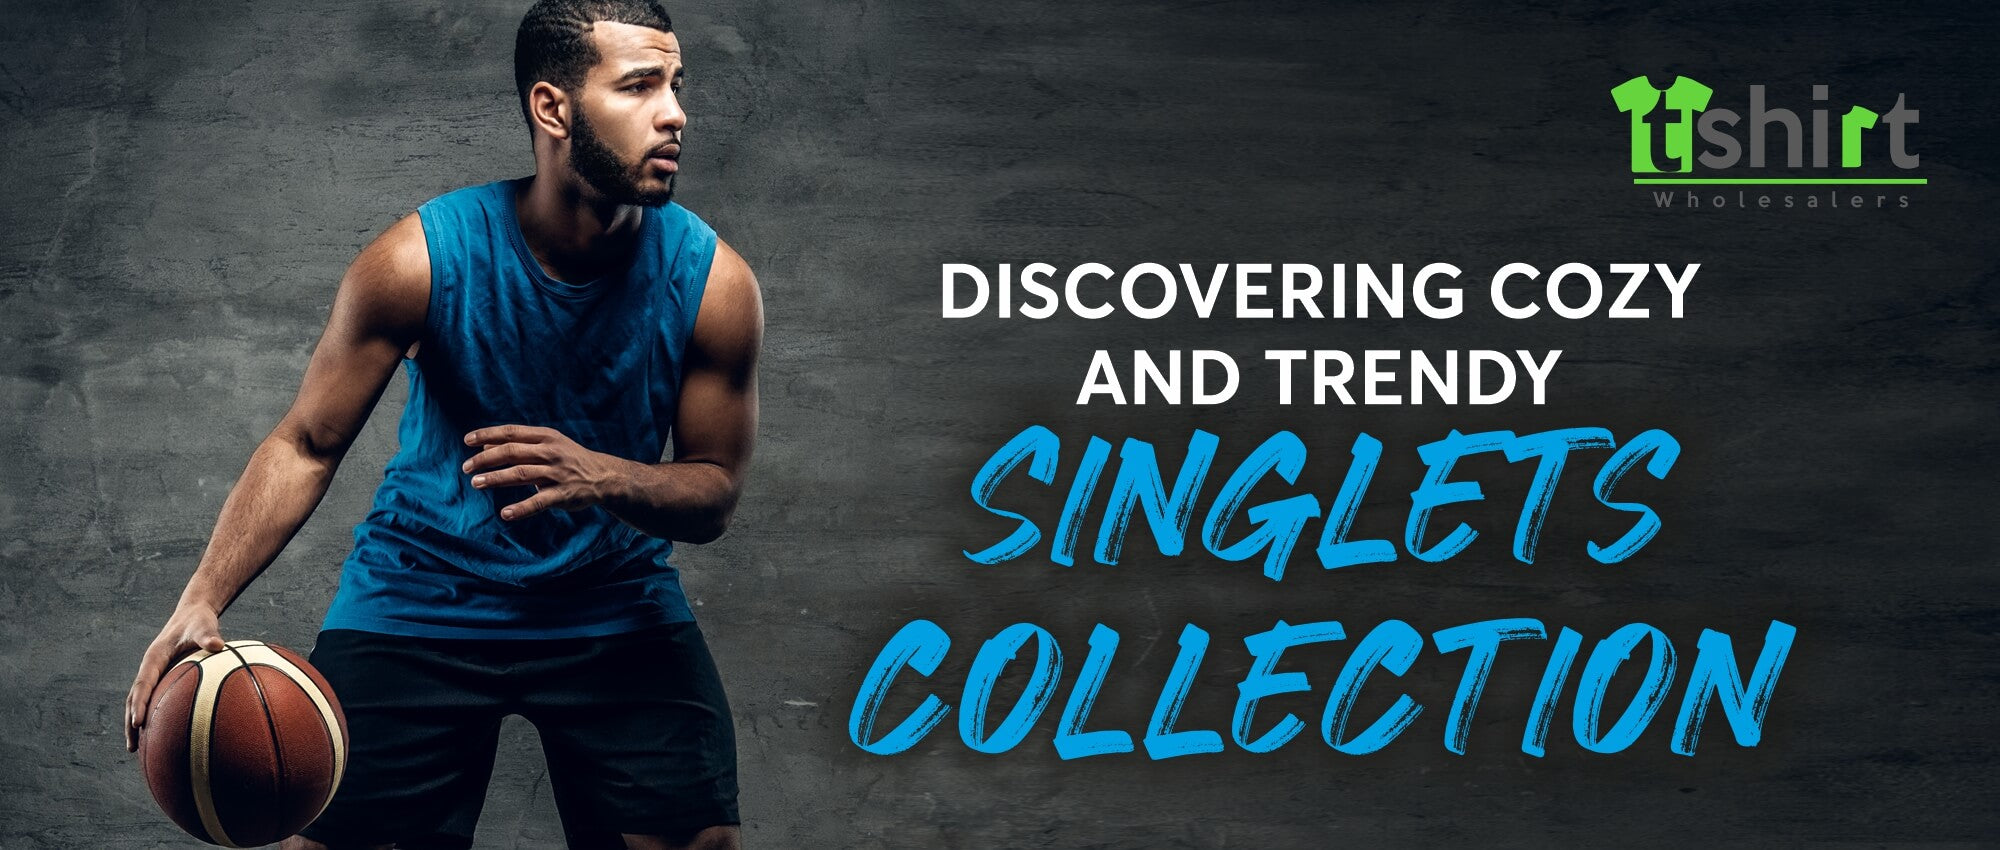 DISCOVERING COZY AND TRENDY-SINGLETS COLLECTION